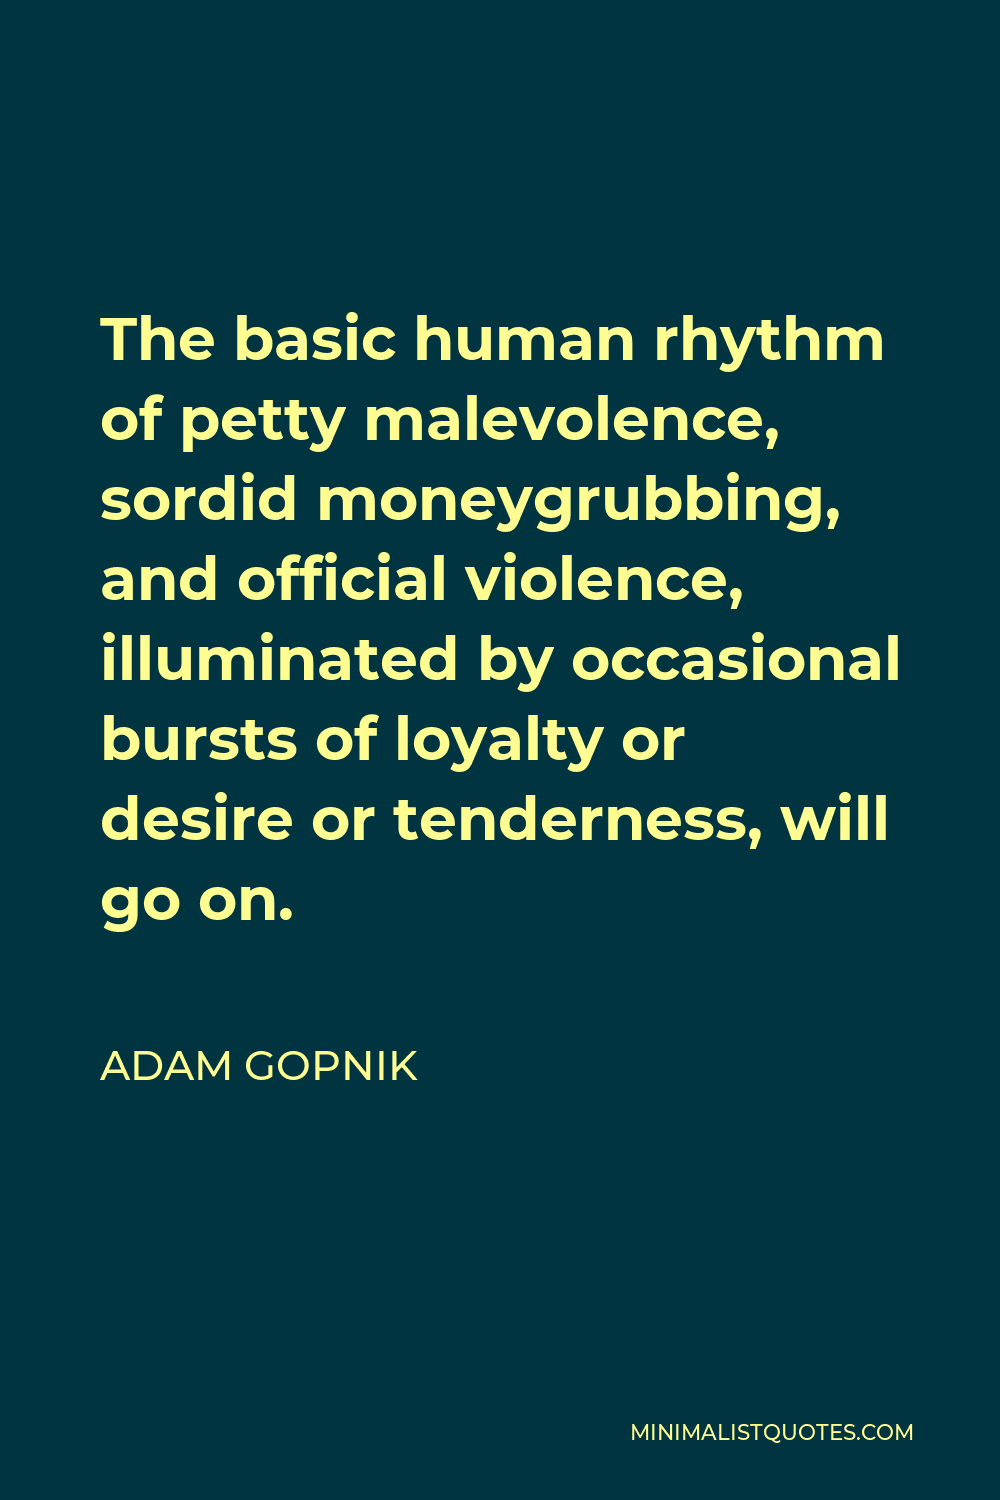 Adam Gopnik Quote - The basic human rhythm of petty malevolence, sordid moneygrubbing, and official violence, illuminated by occasional bursts of loyalty or desire or tenderness, will go on.